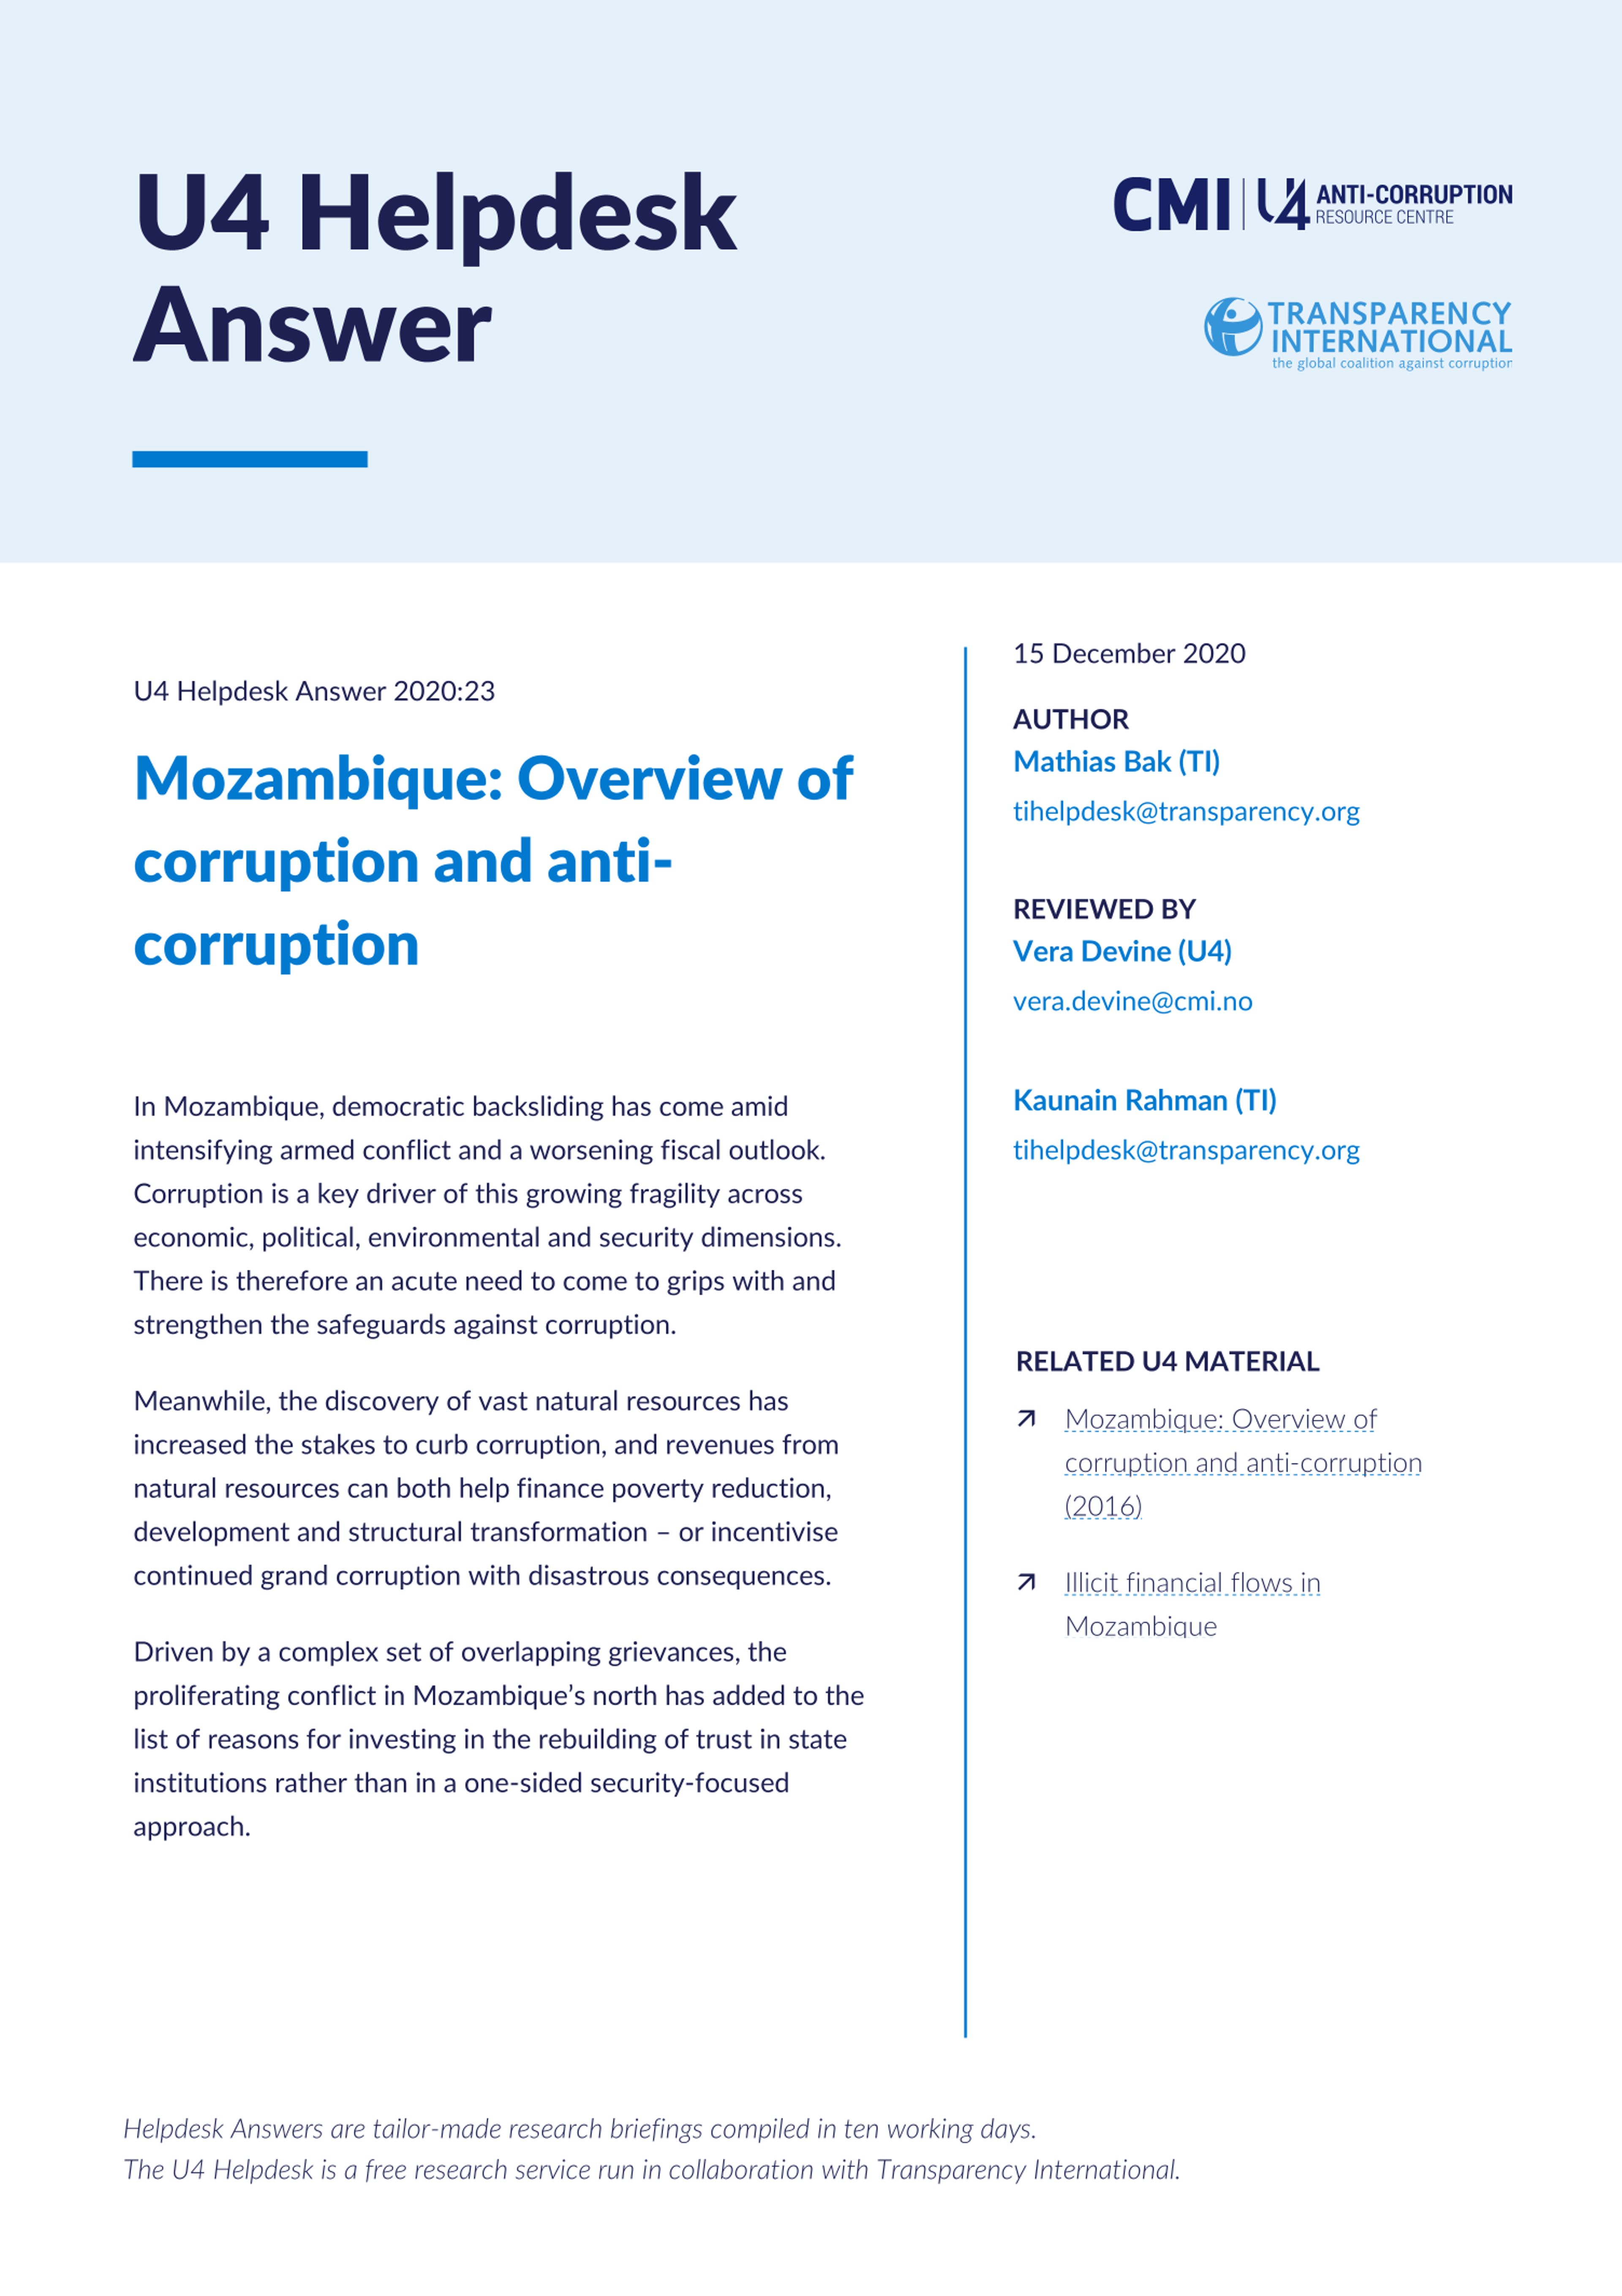 Mozambique: Overview of corruption and anti-corruption